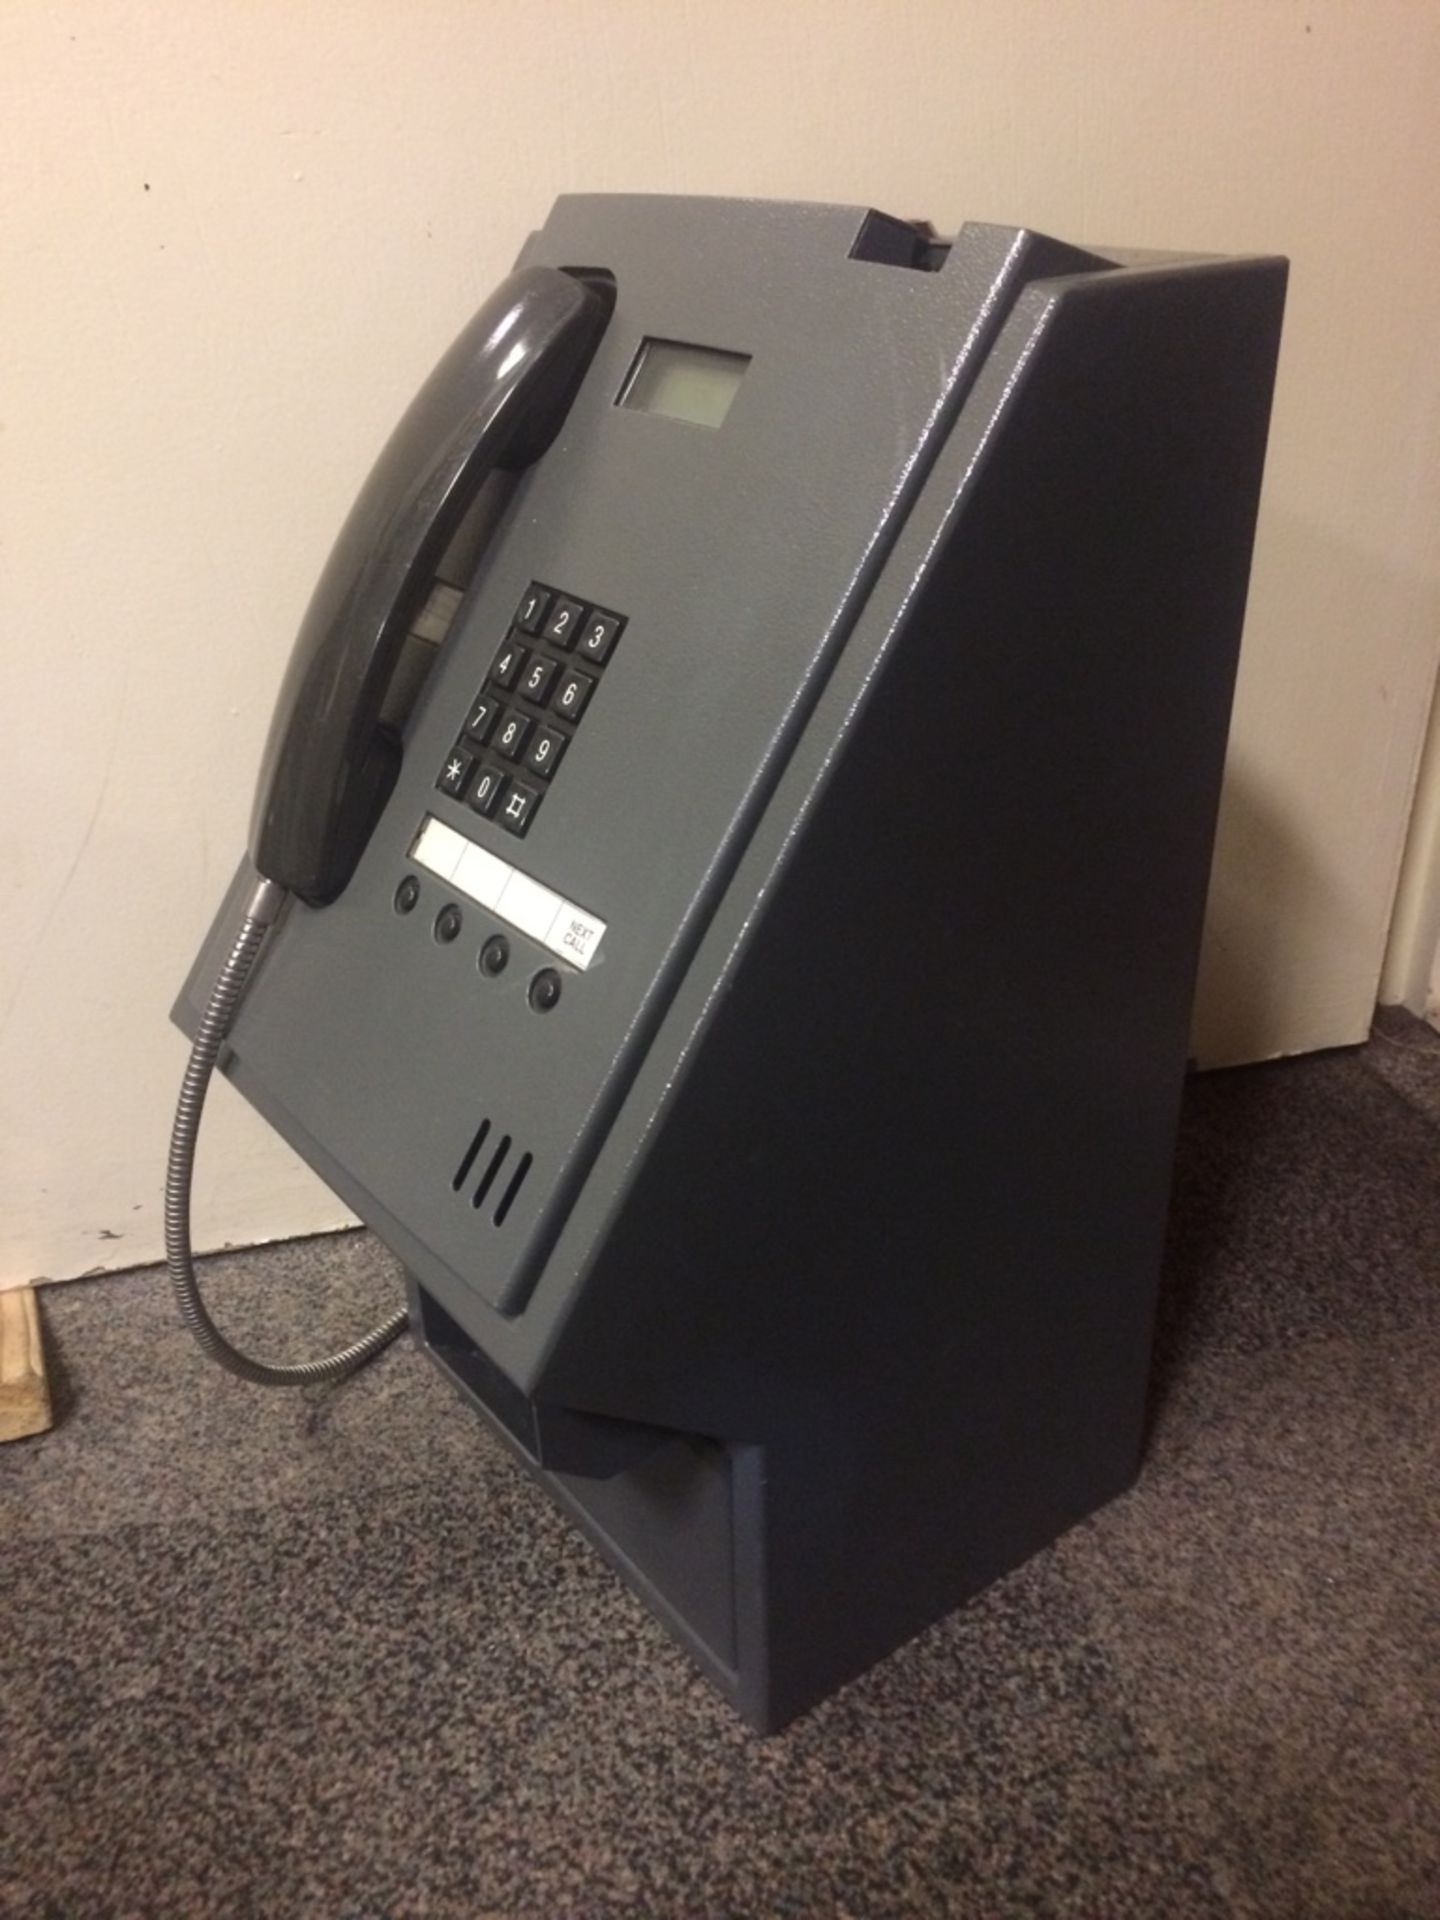 Bt Payphone PLEASE READ LOT 0 AS THE IMPORTANT INFORMATION DIFFERS FROM OUR USUAL AUCTIONS.